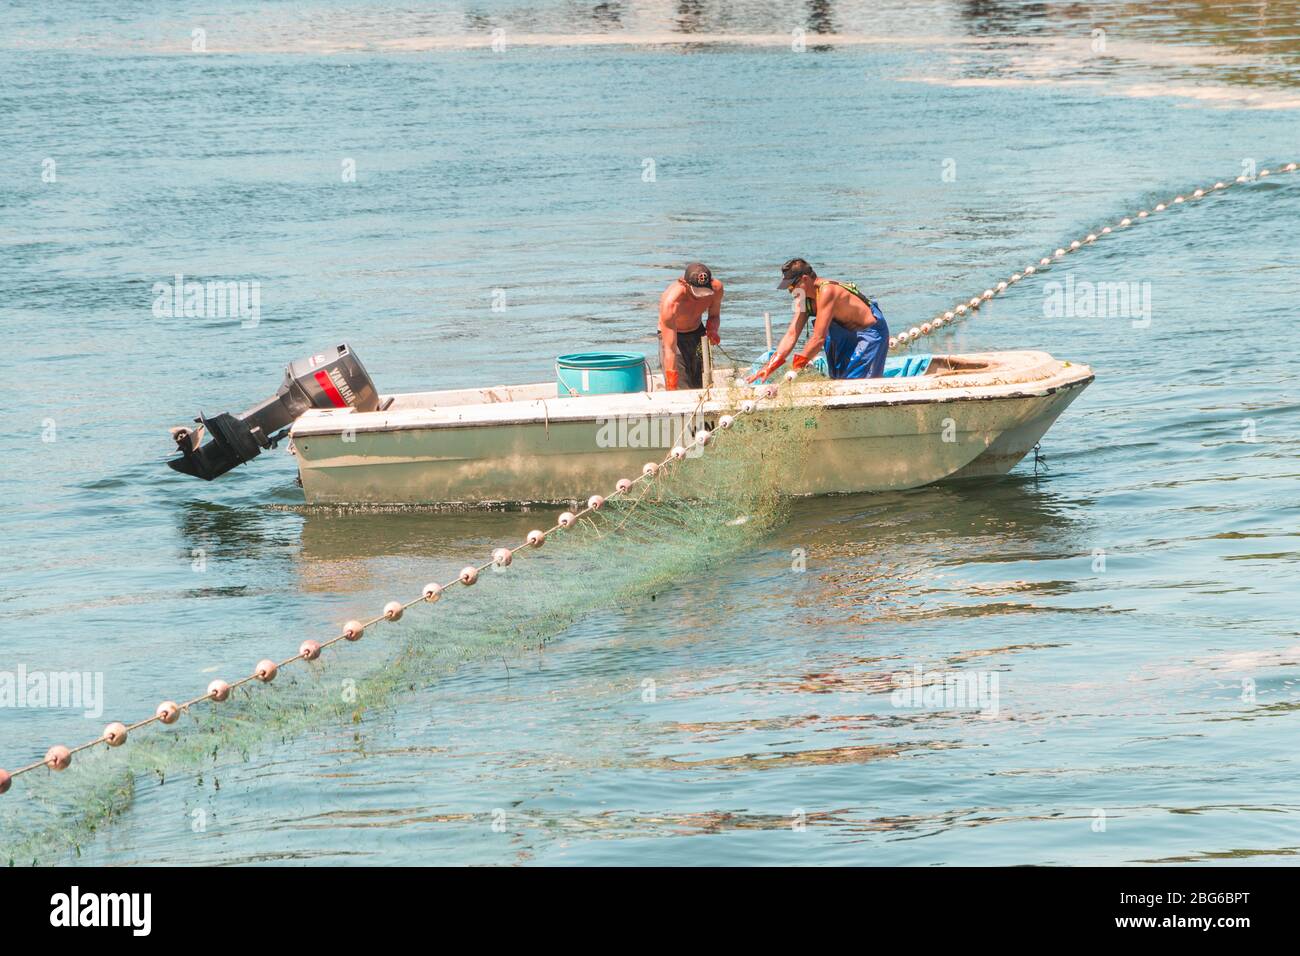 Men with nets catching fish Stock Photo